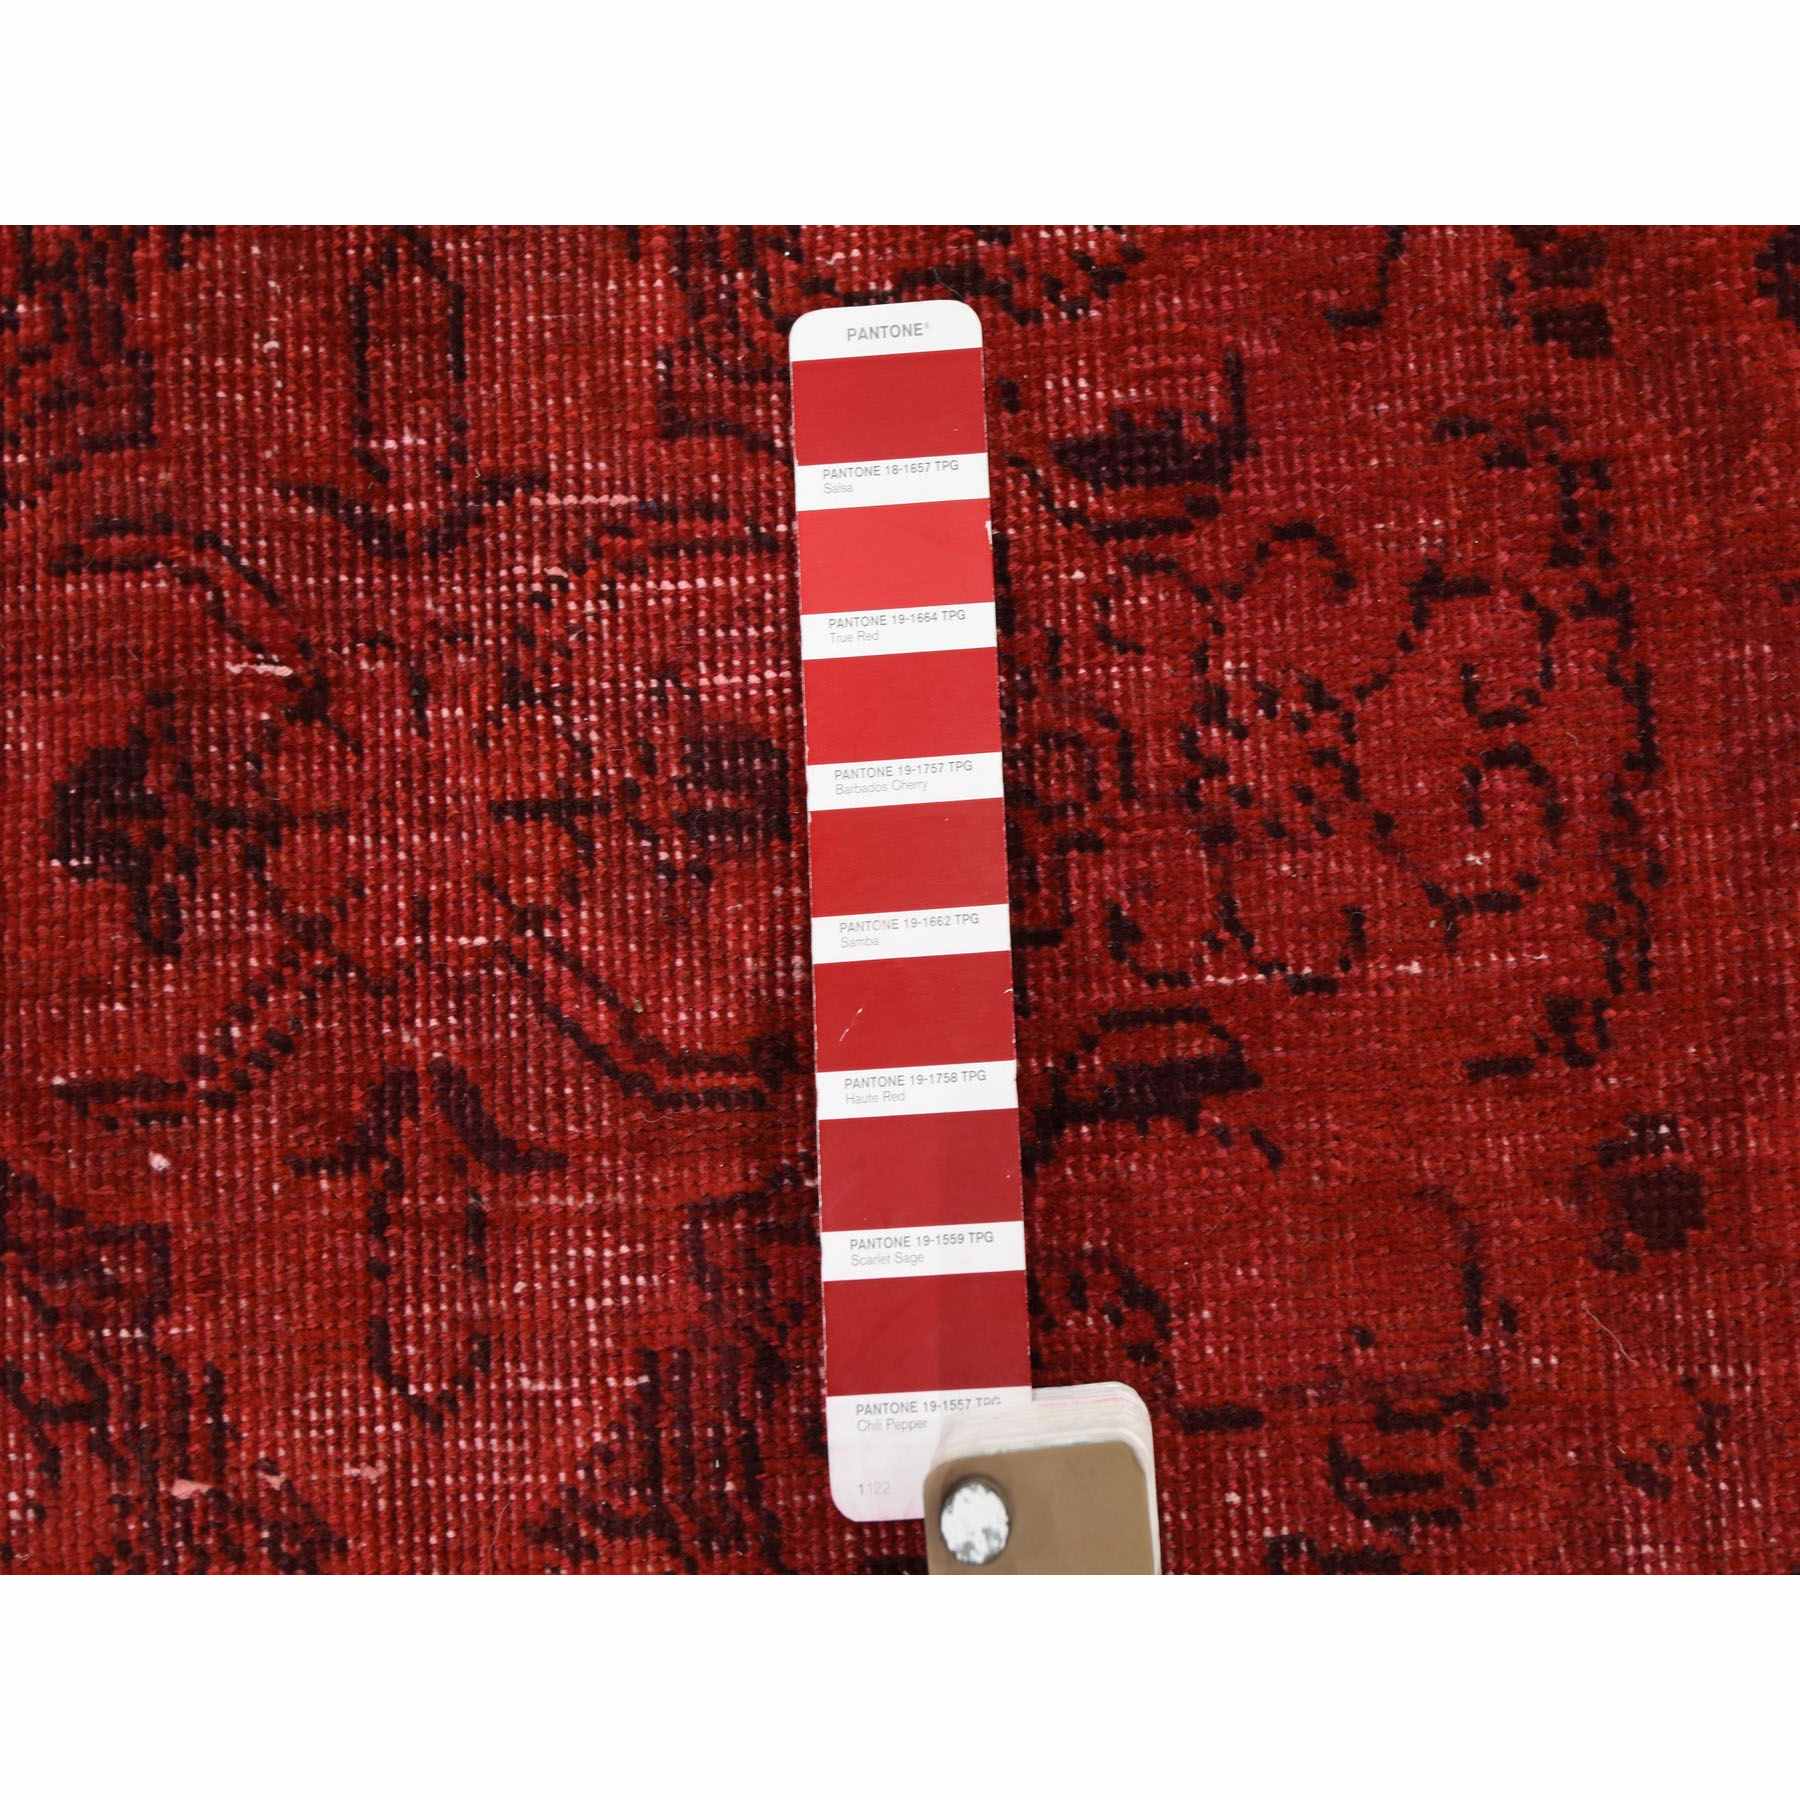 Overdyed-Vintage-Hand-Knotted-Rug-243155